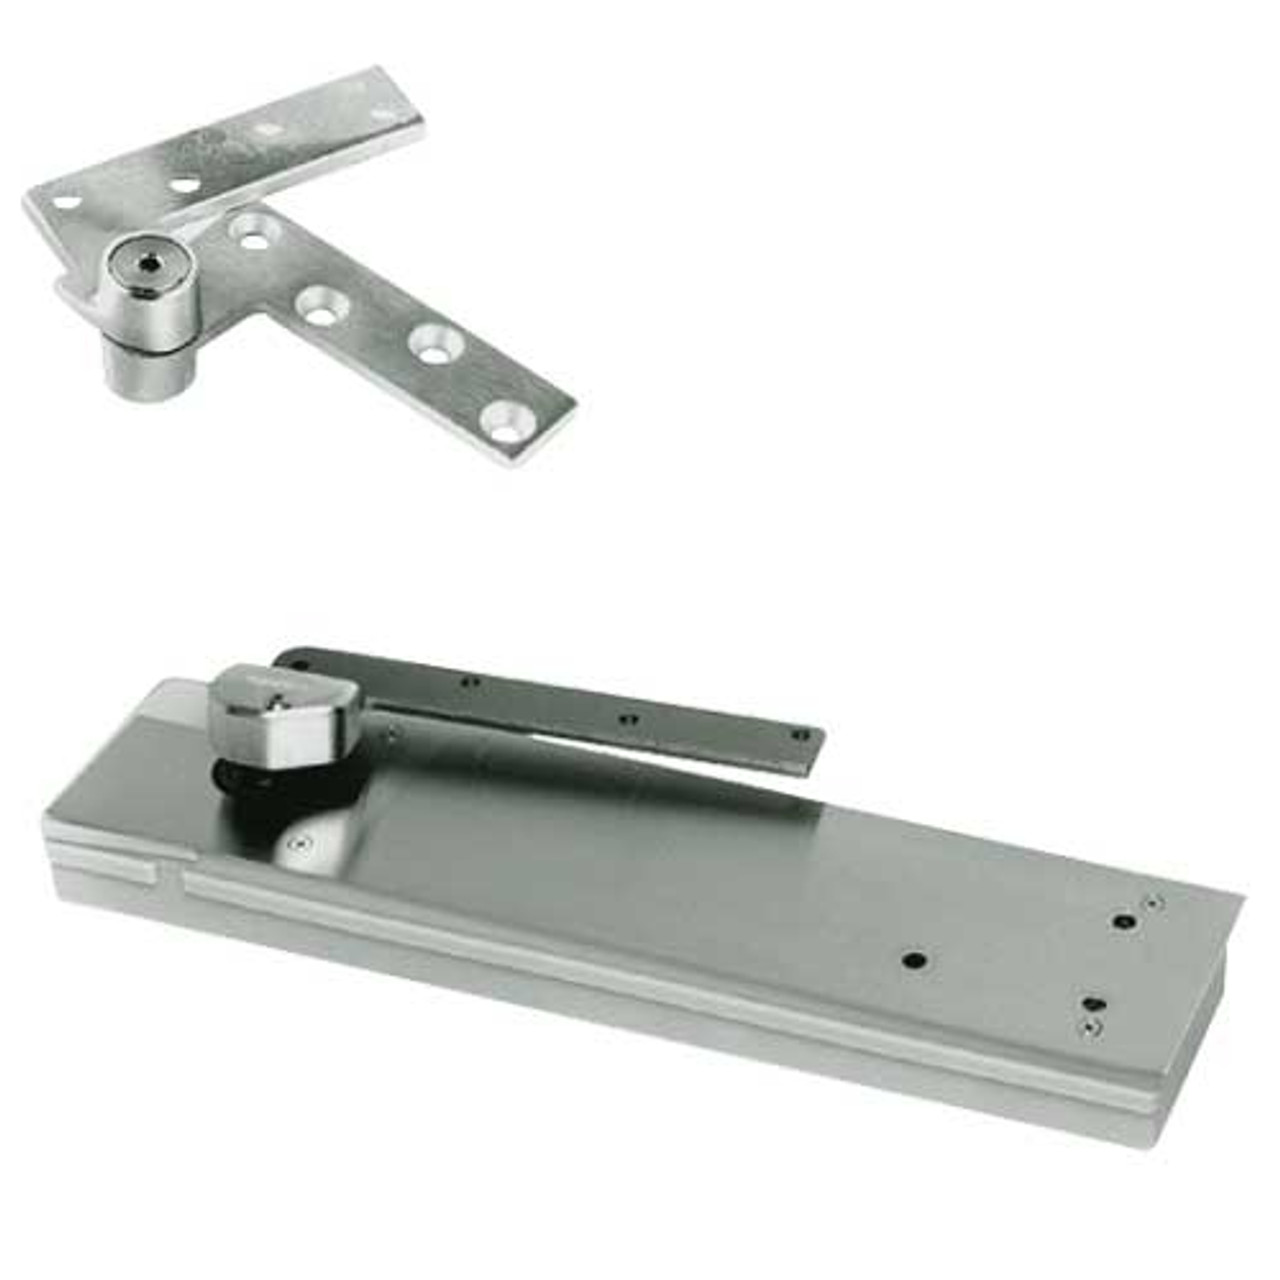 5103ABC105-SC-LH-619 Rixson 51 Series 3/4" Offset Hung Shallow Depth Floor Closers in Satin Nickel Finish